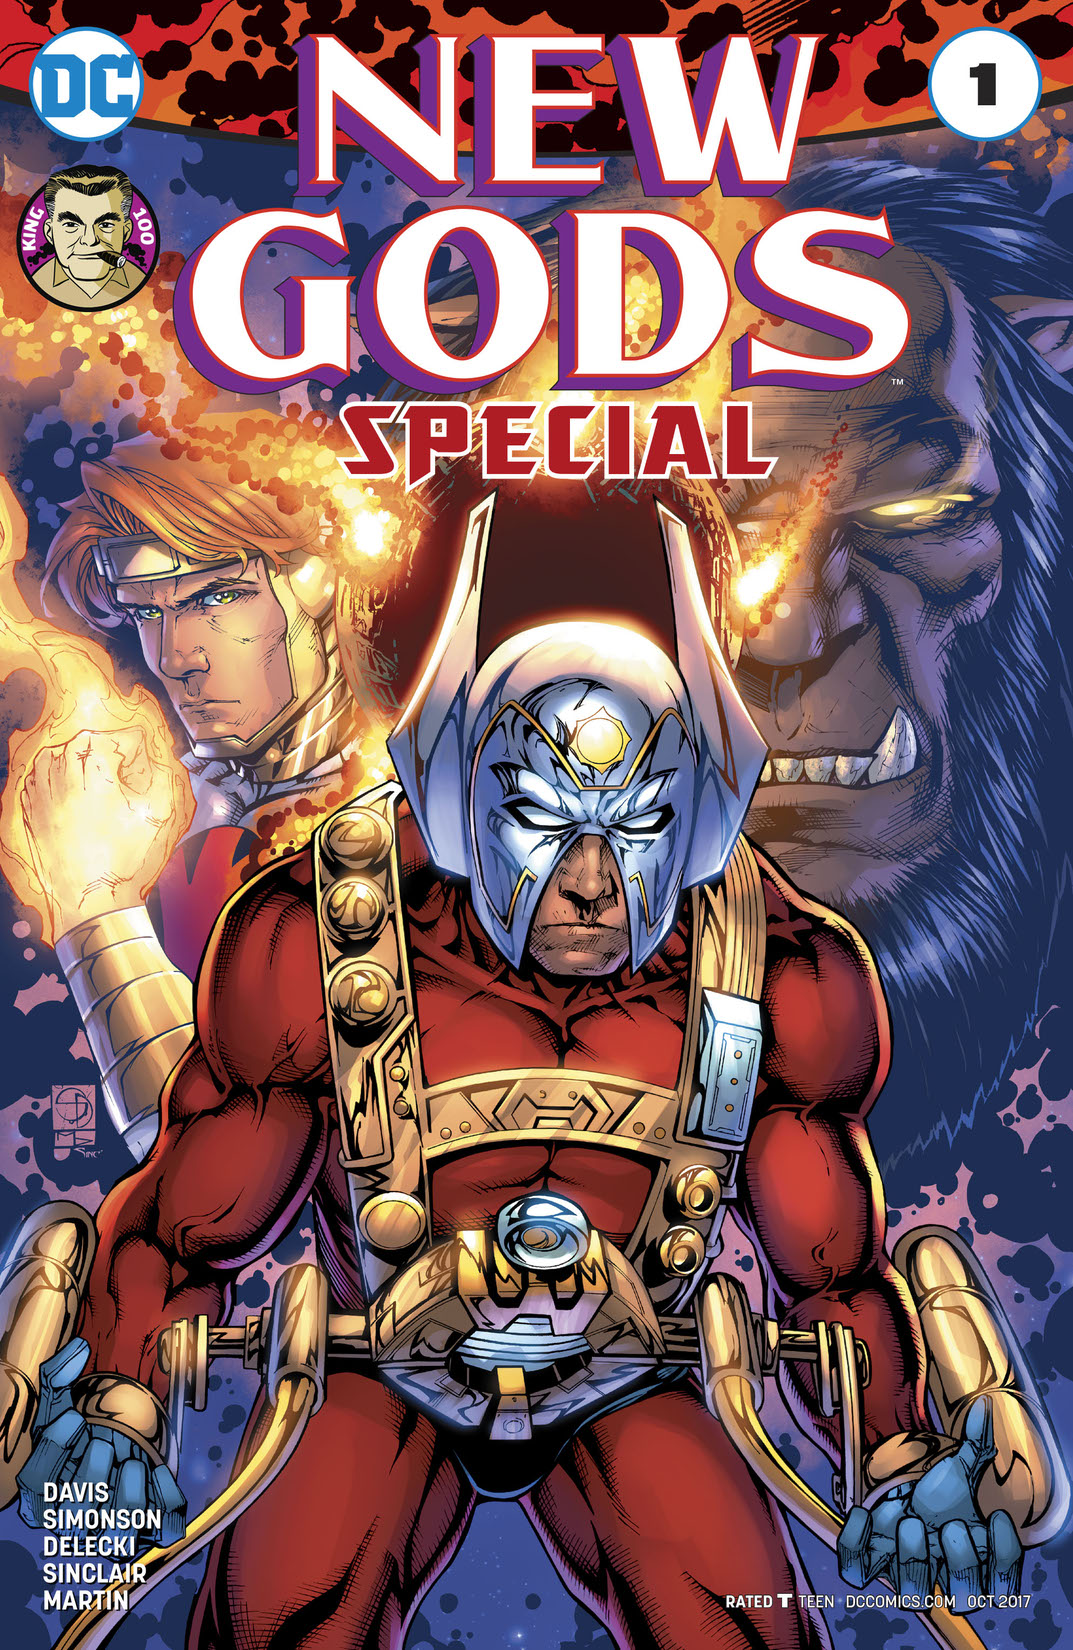 The New Gods Special #1 #1 preview images